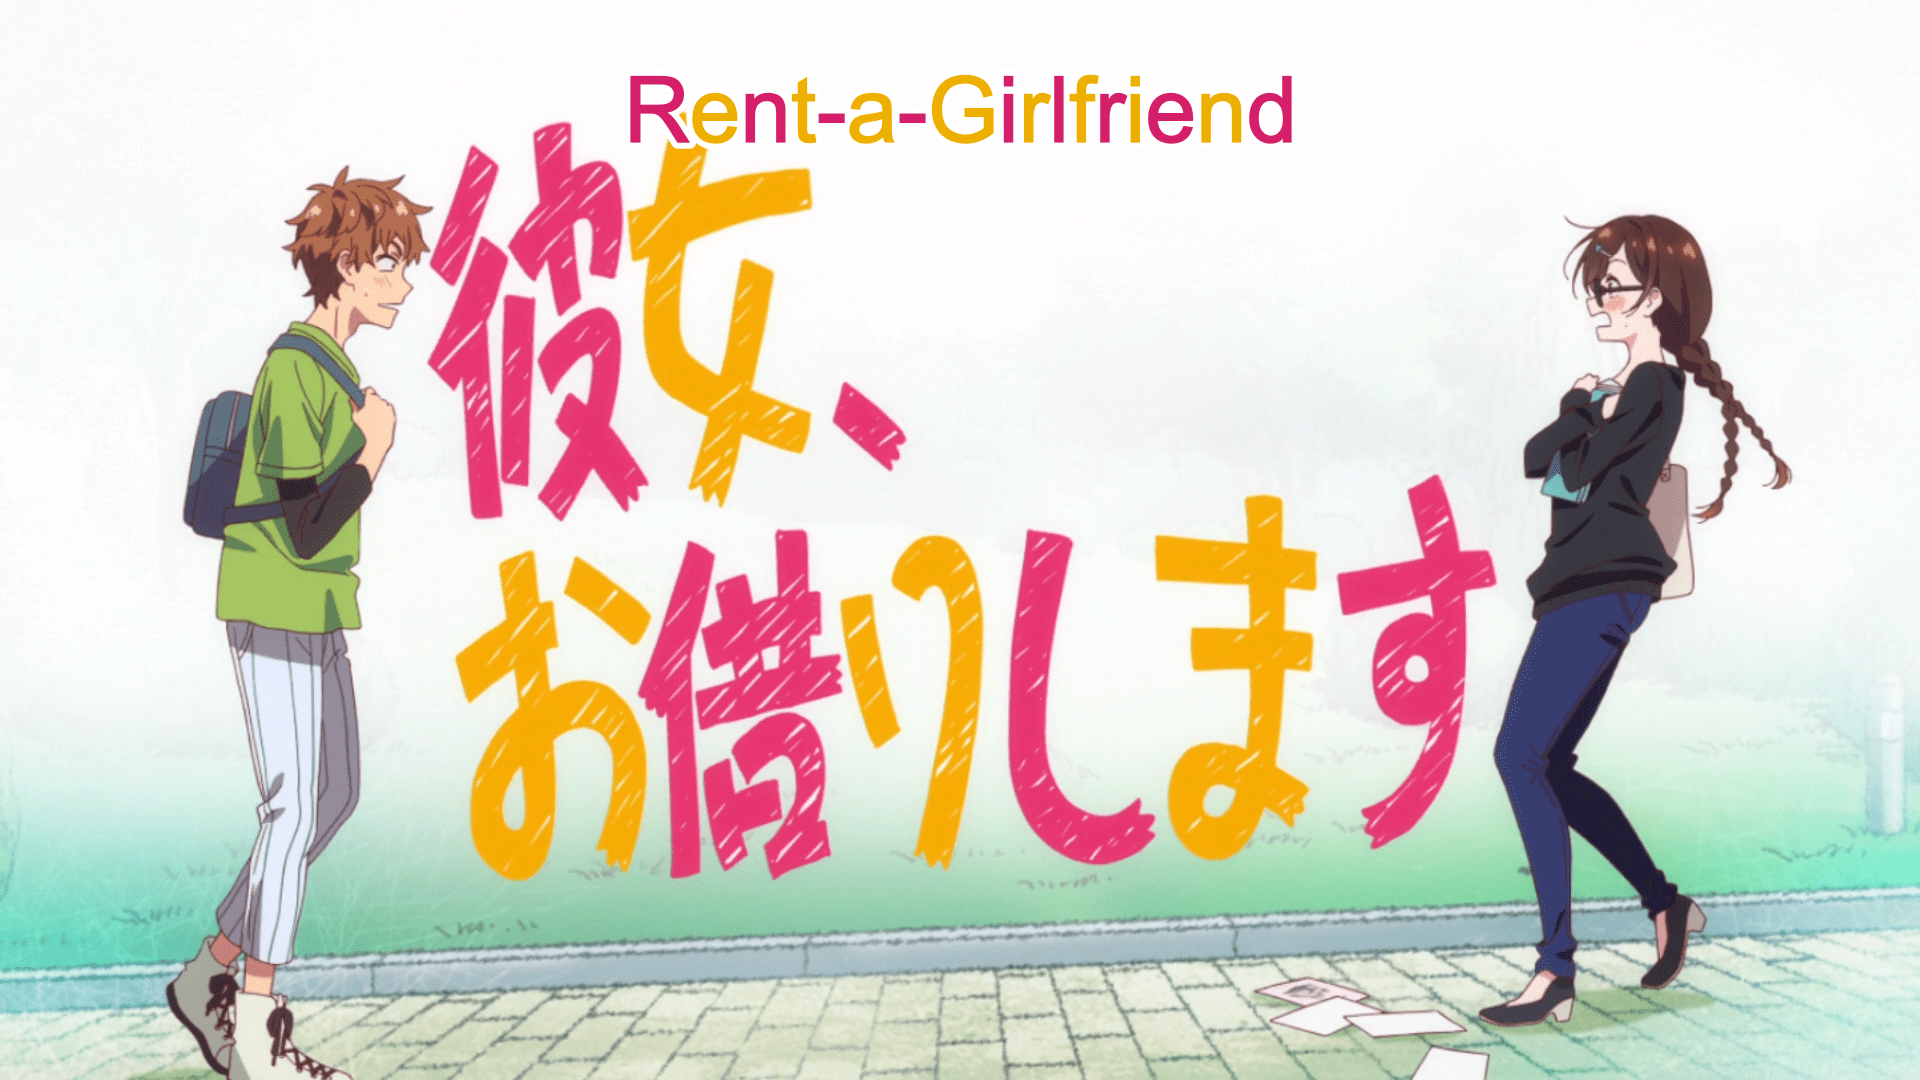 Tons of awesome Rent A Girlfriend anime wallpapers to download for free. 